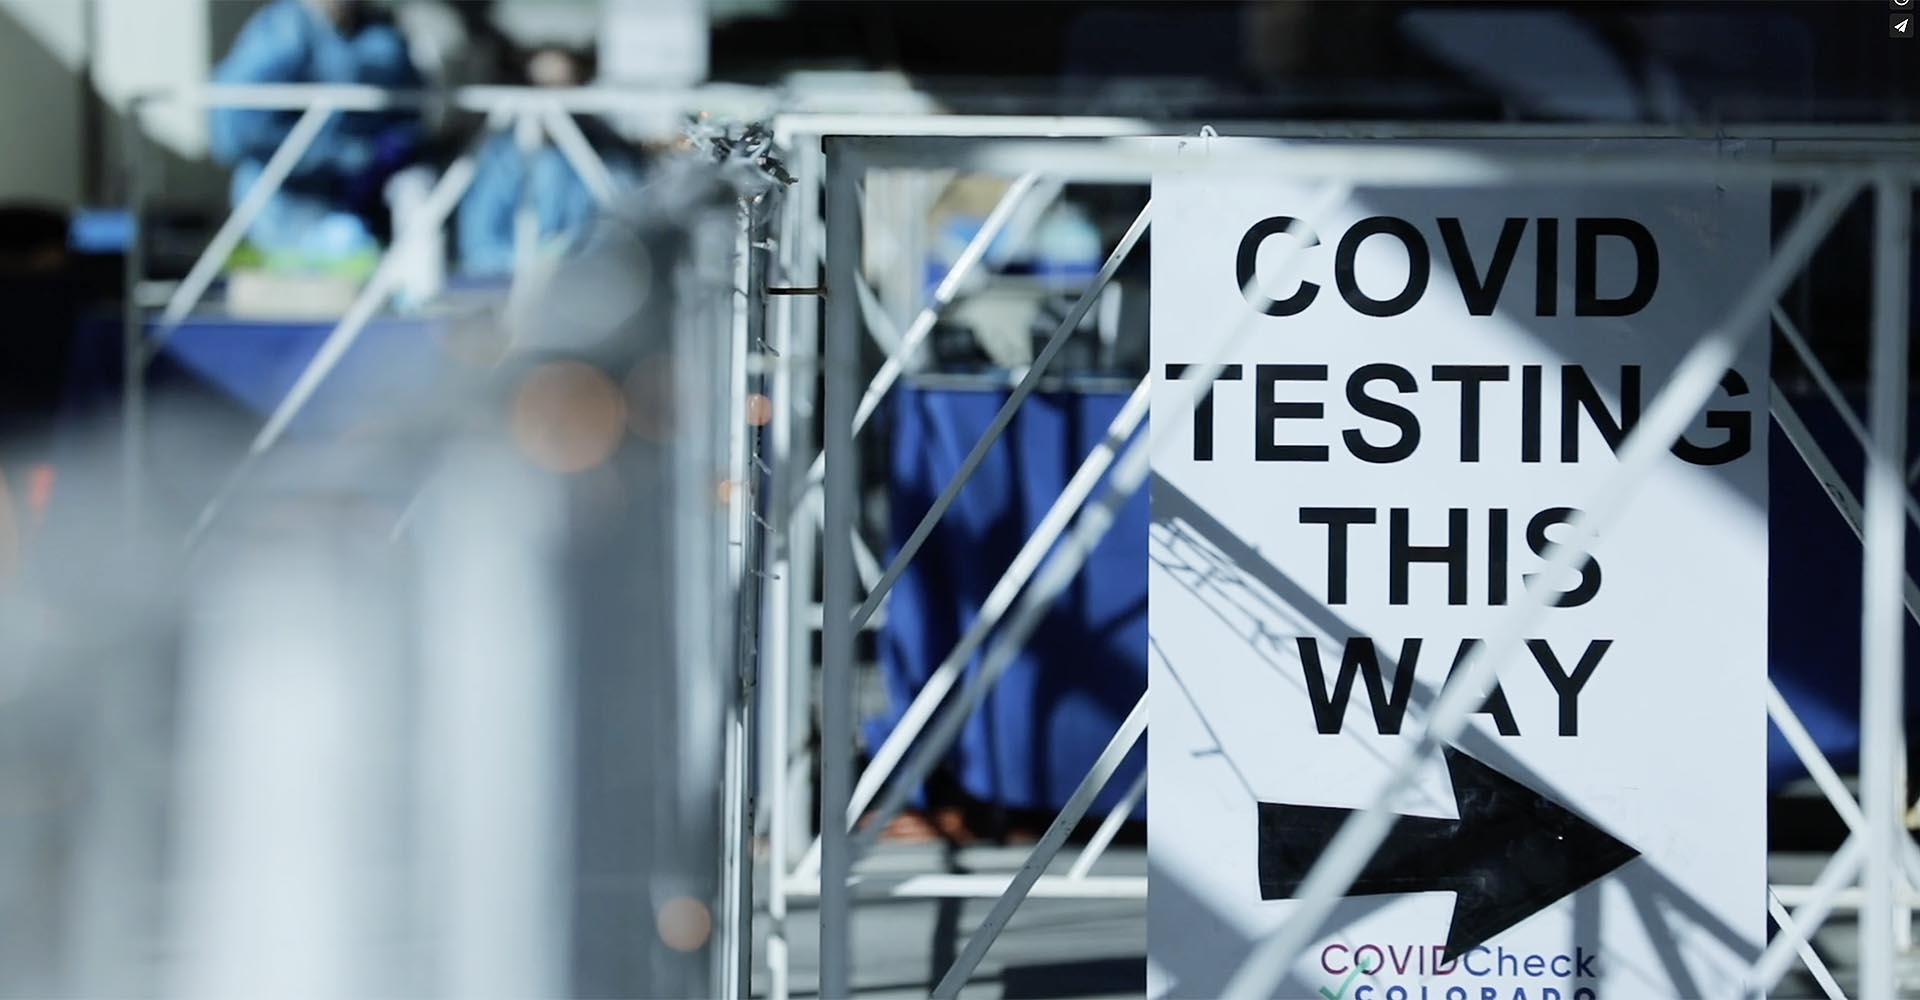 Sign with the text "Covid Testing This Way"